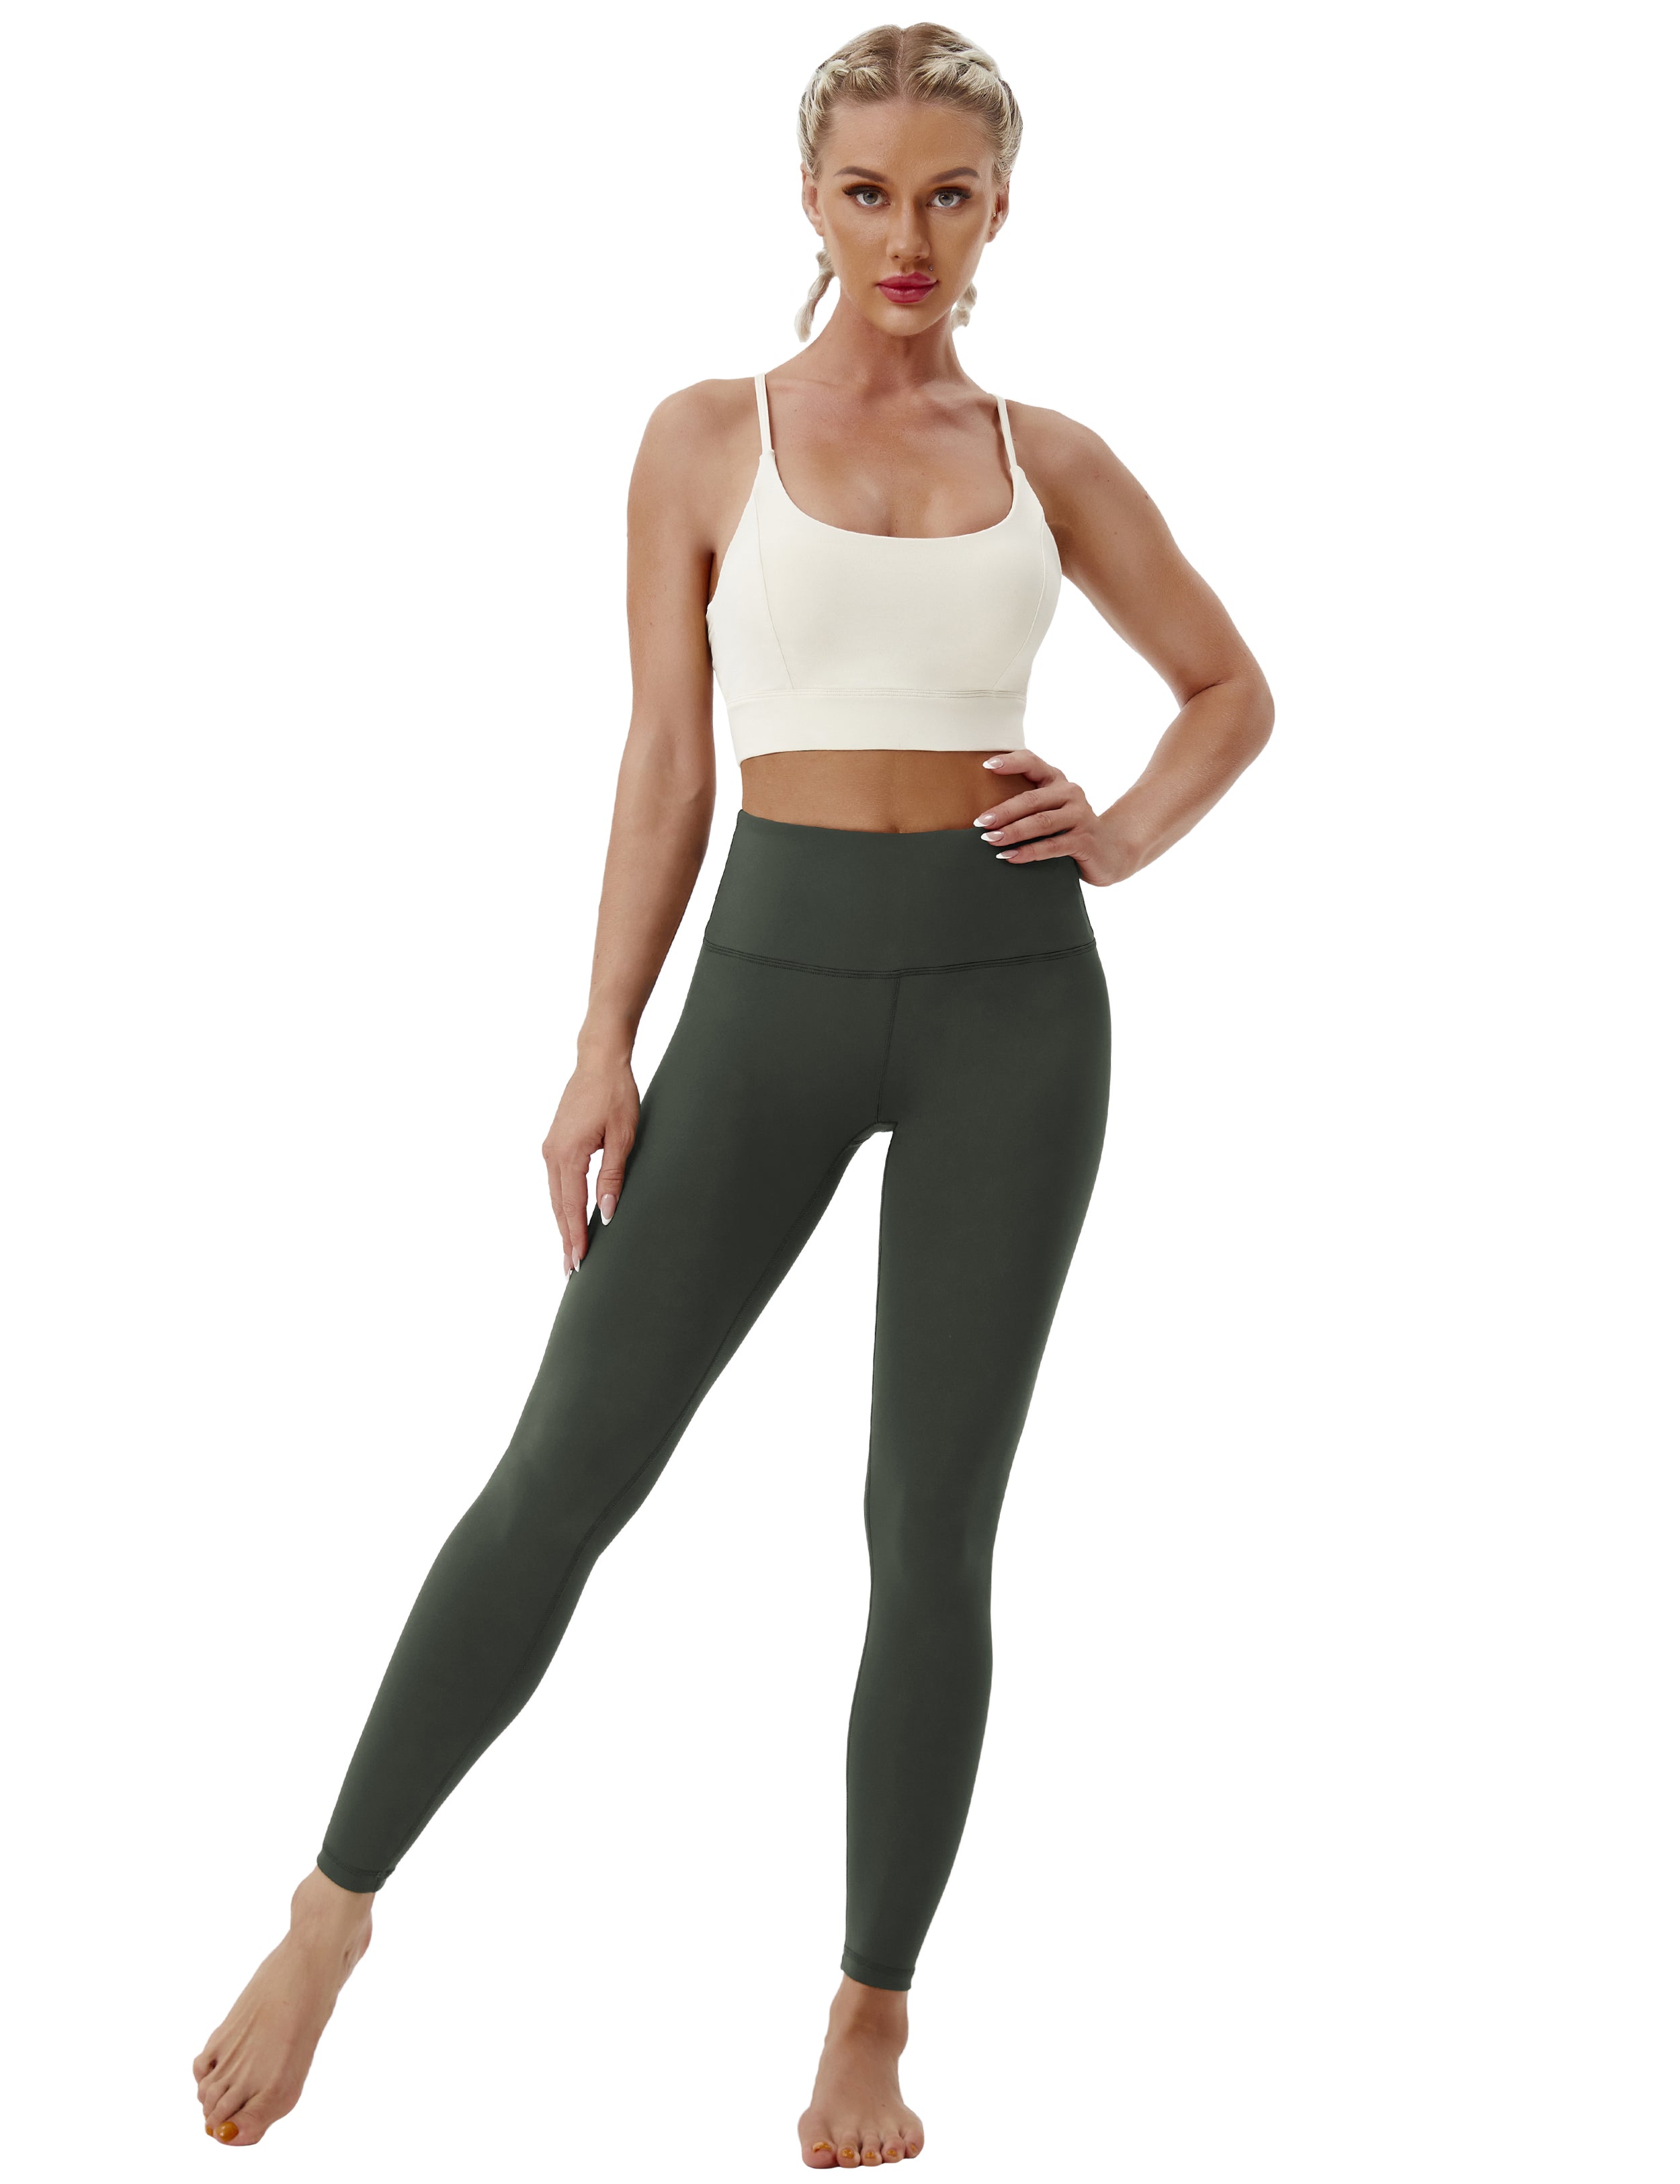 High Waist Running Pants olivegray 75%Nylon/25%Spandex Fabric doesn't attract lint easily 4-way stretch No see-through Moisture-wicking Tummy control Inner pocket Four lengths